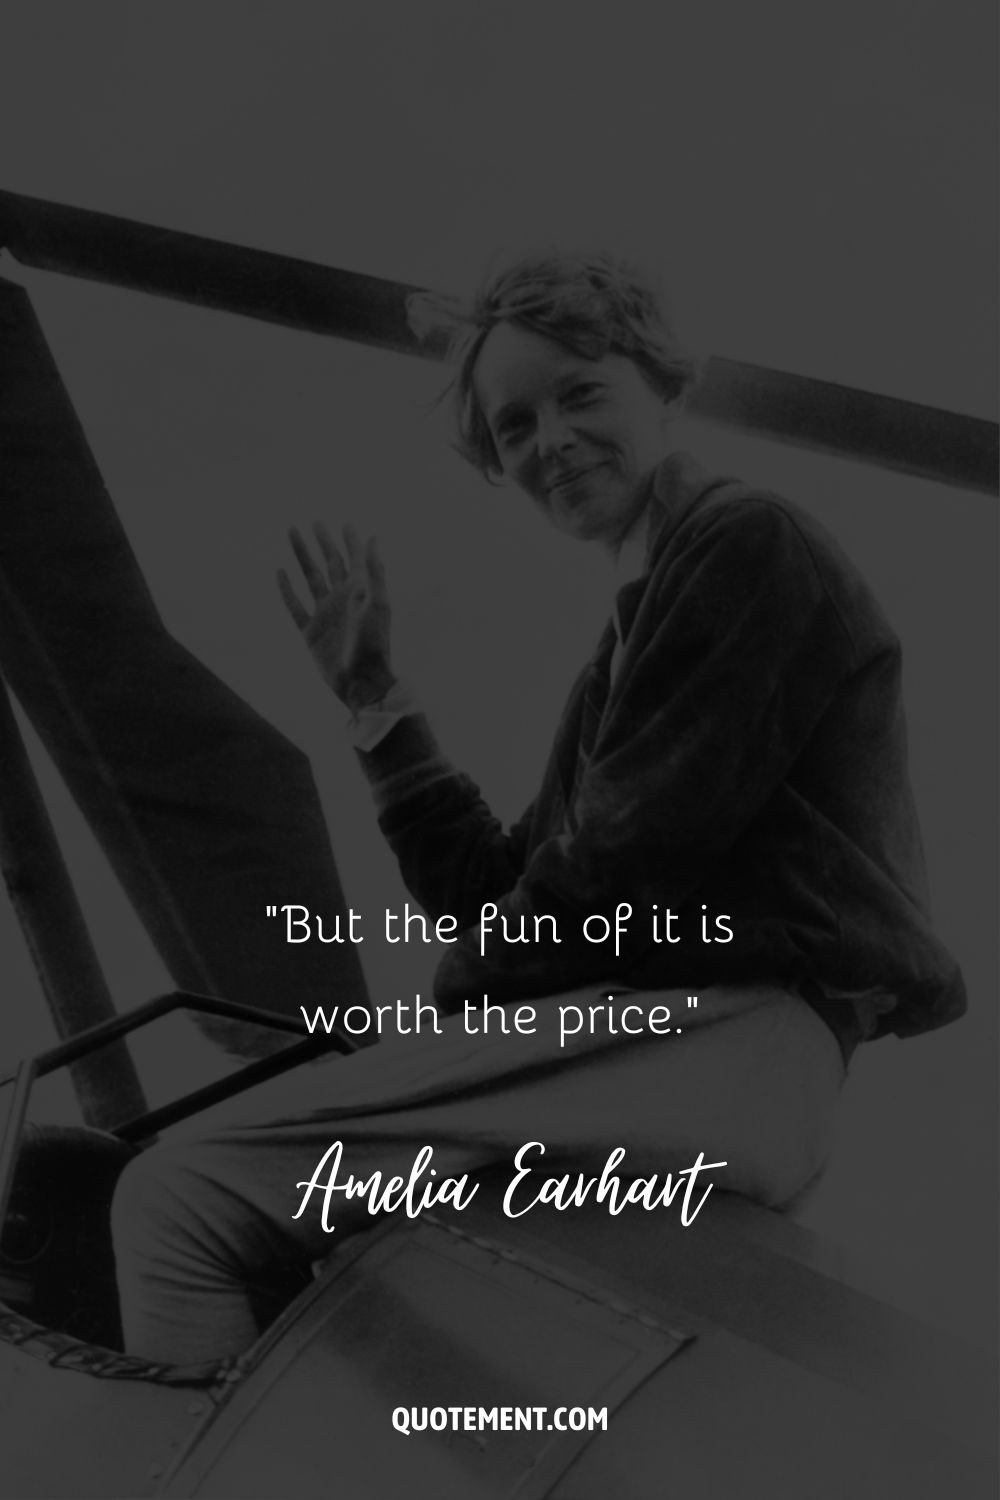 “But the fun of it is worth the price.” ― Amelia Earhart, The Fun of It